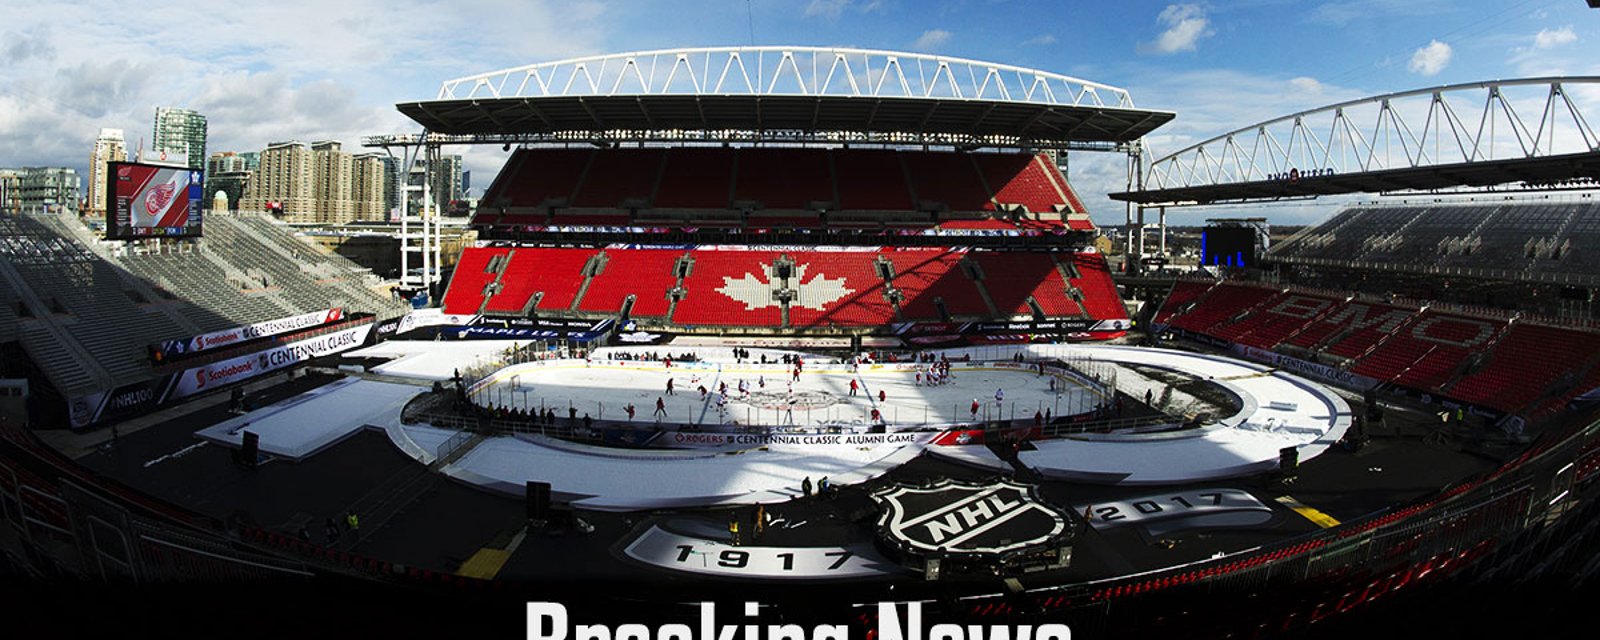 BREAKING NEWS: NHL outdoor game to be announced on Friday will please the fans.